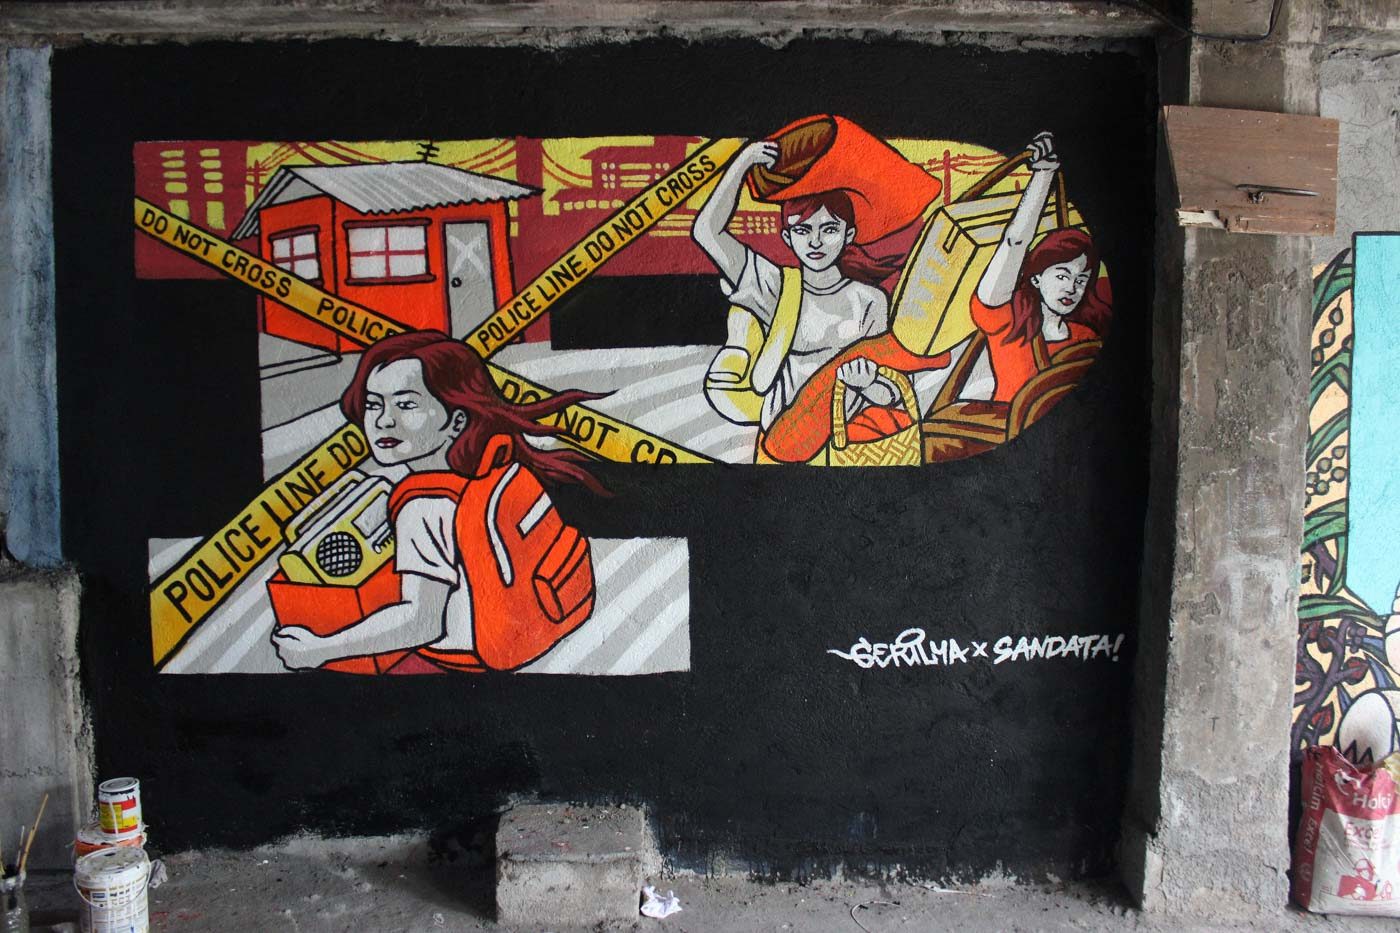 AWAY. A mural showing Irene abandoning her home after Gerry’s killing is by street artist collective Gerilya, together with local residents, in a wall in an alley in Quezon City. 